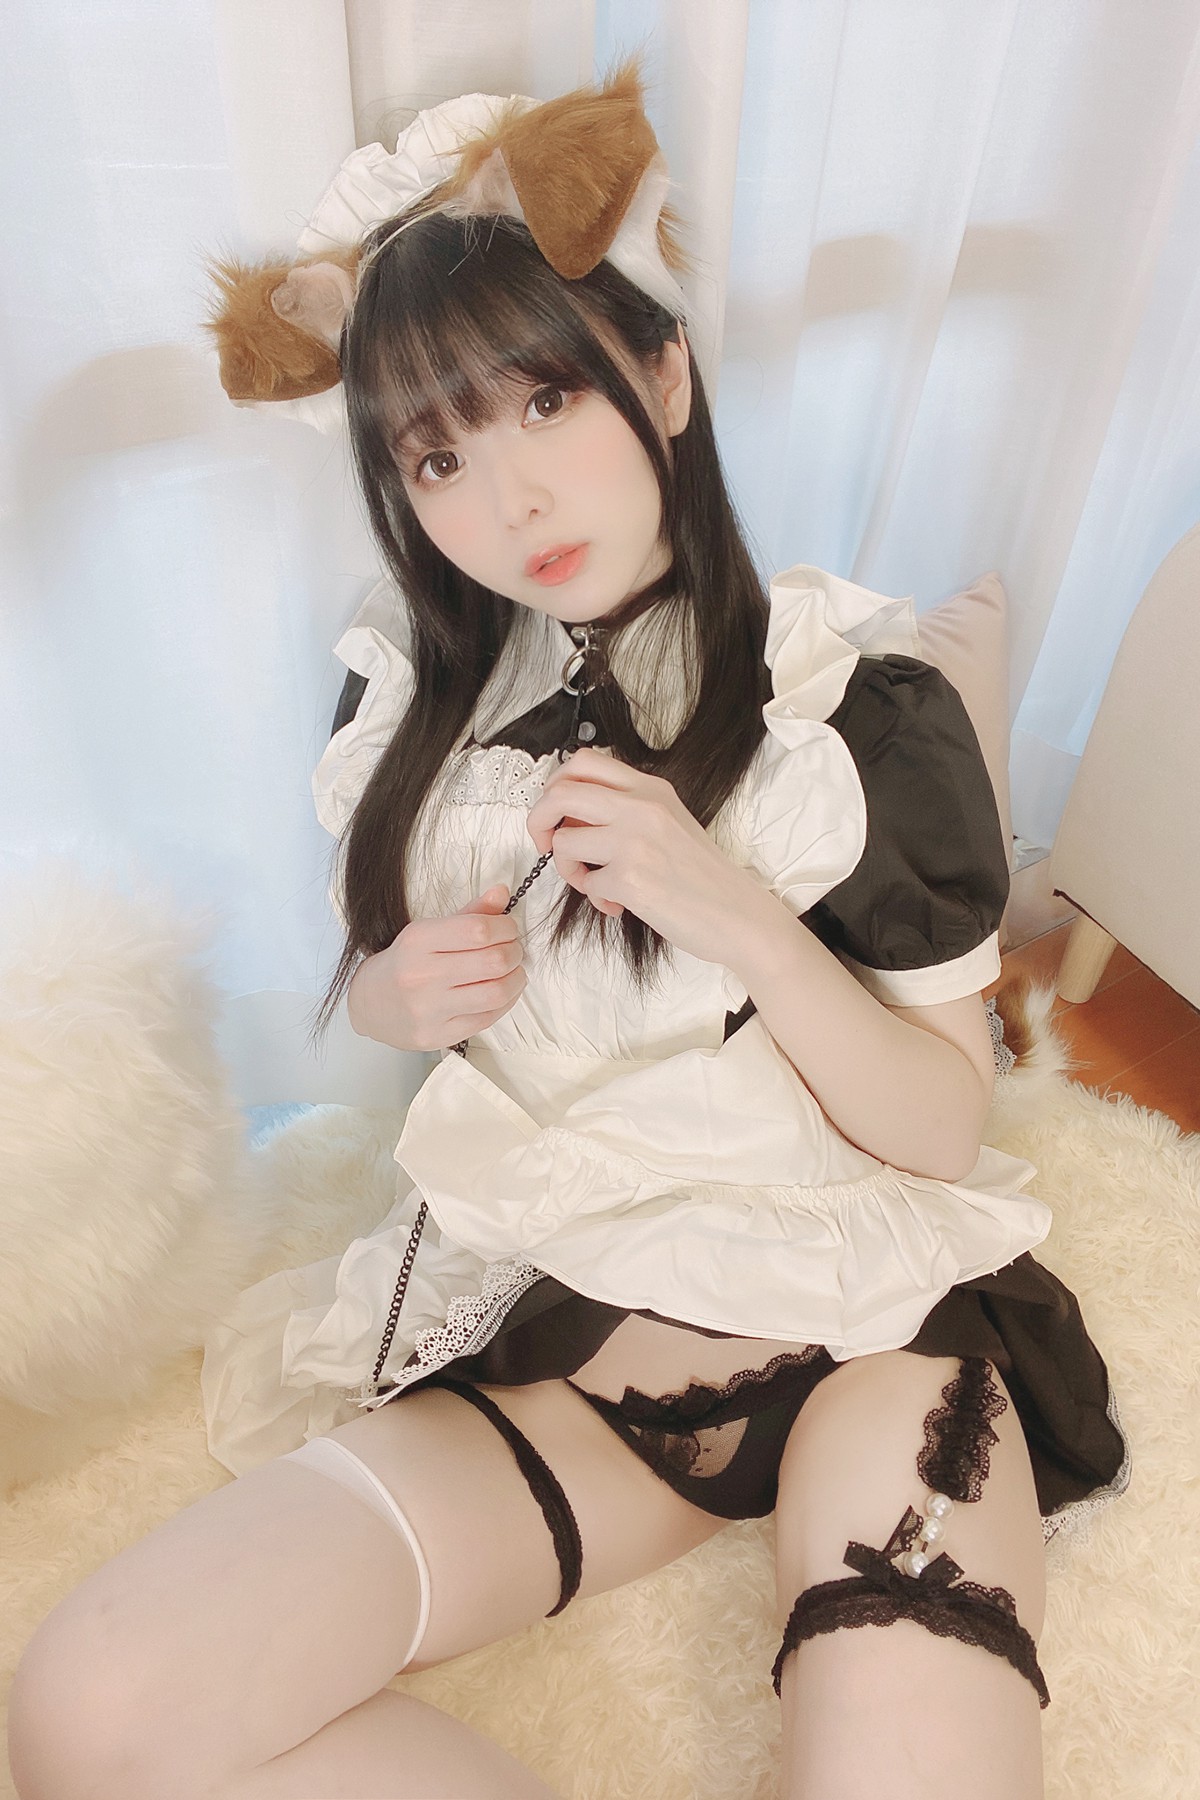 Coser@Shimo – Puppy Maid